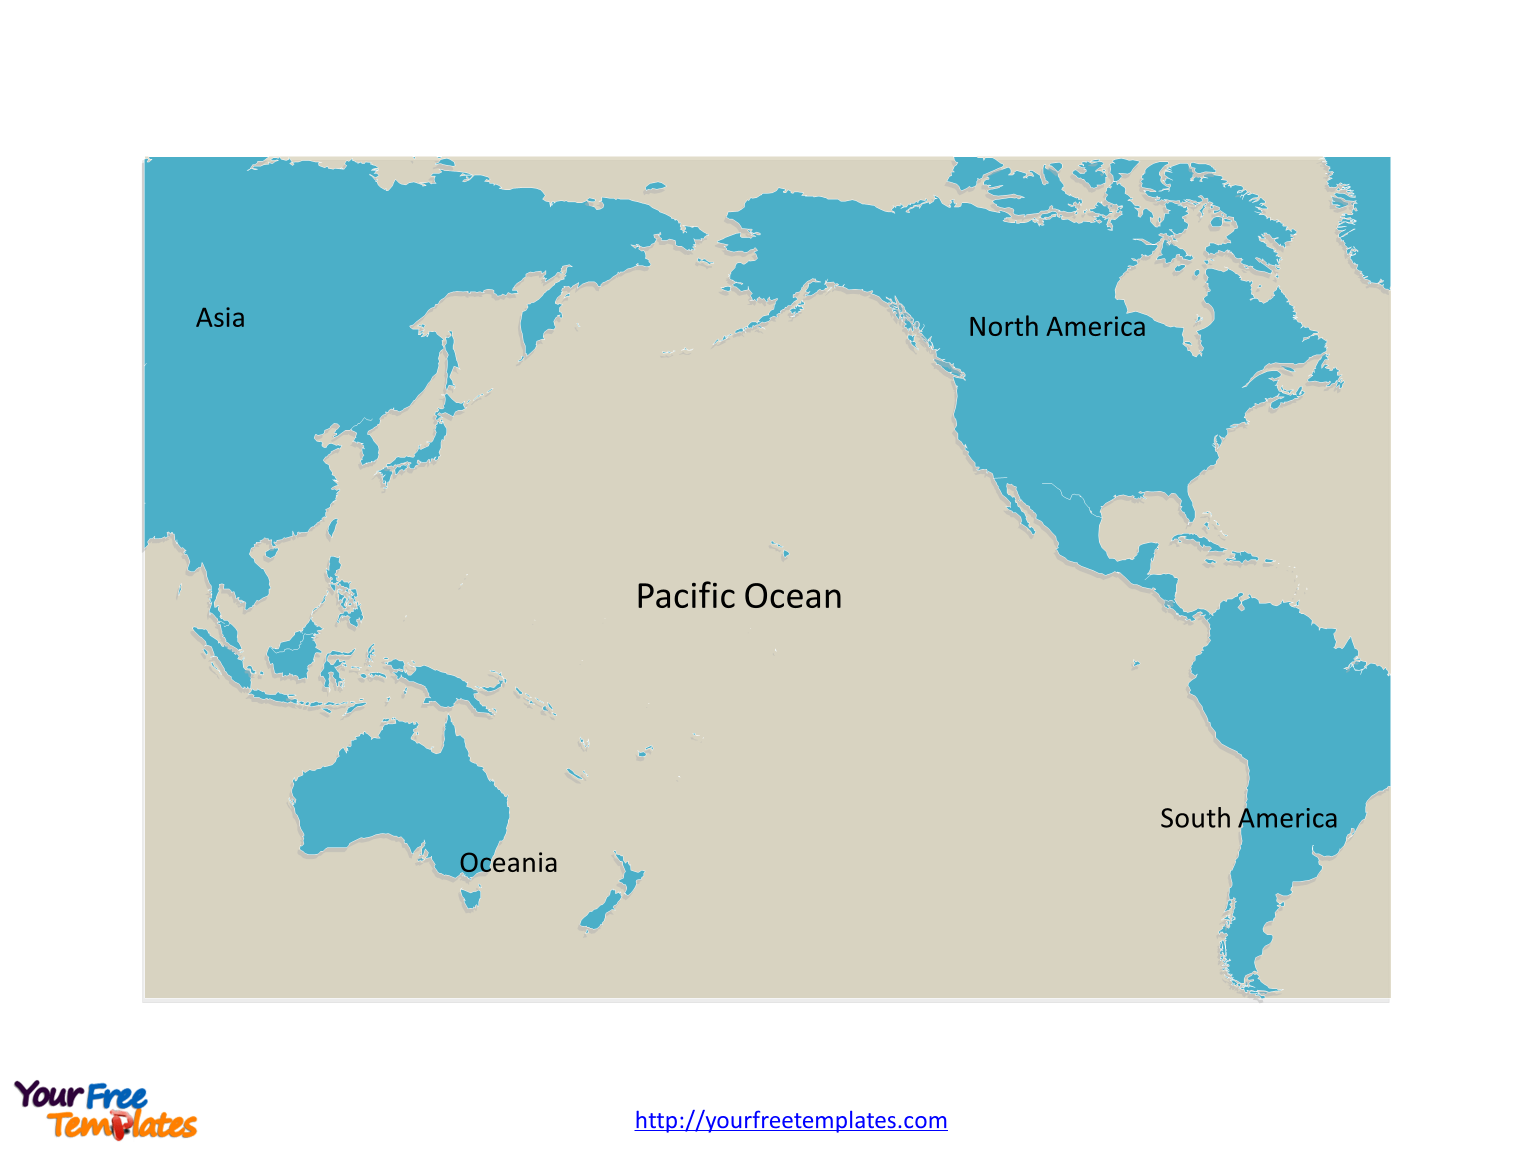 Pacific Ocean Outline map labeled with continent names